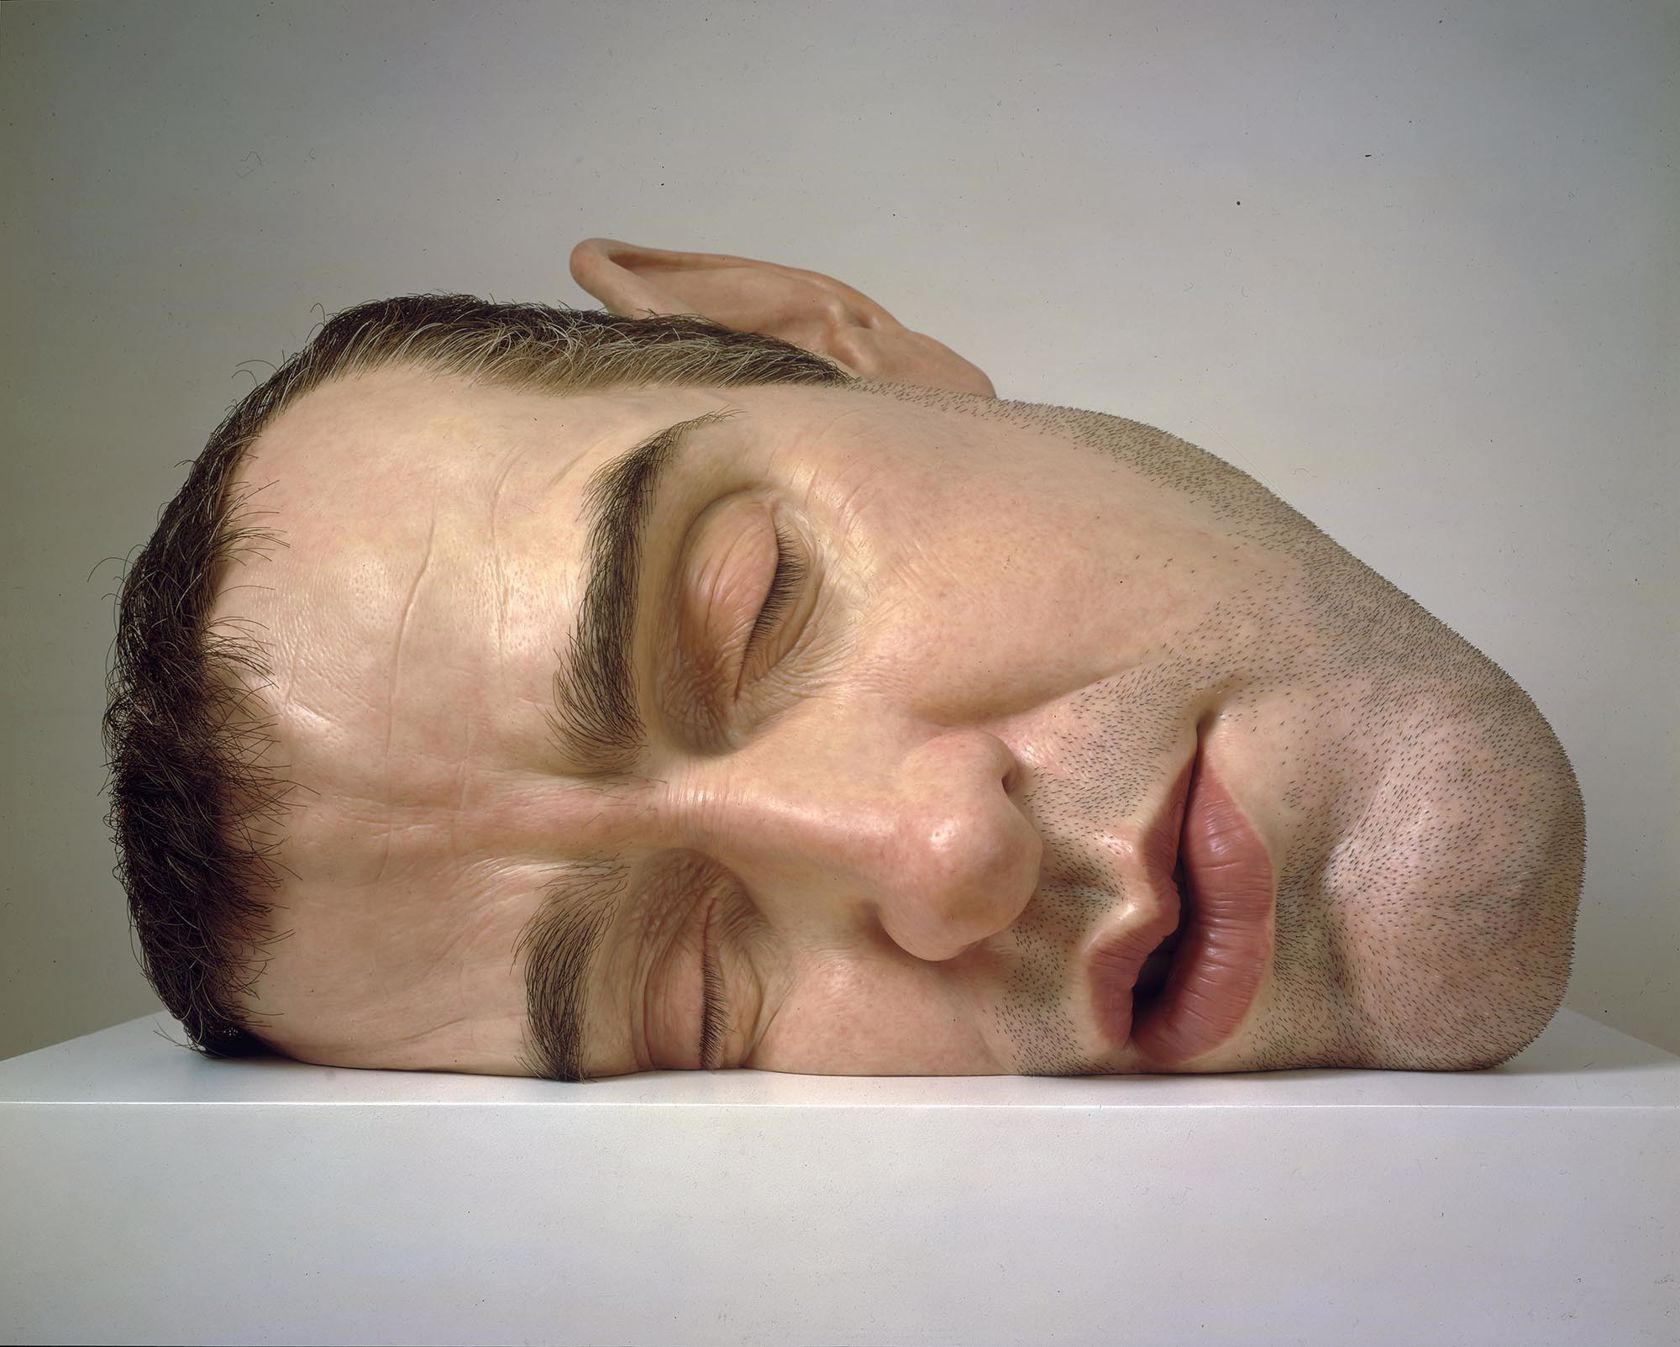 Introducing Ron Mueck | Inside the MFAH | The Museum Arts, Houston